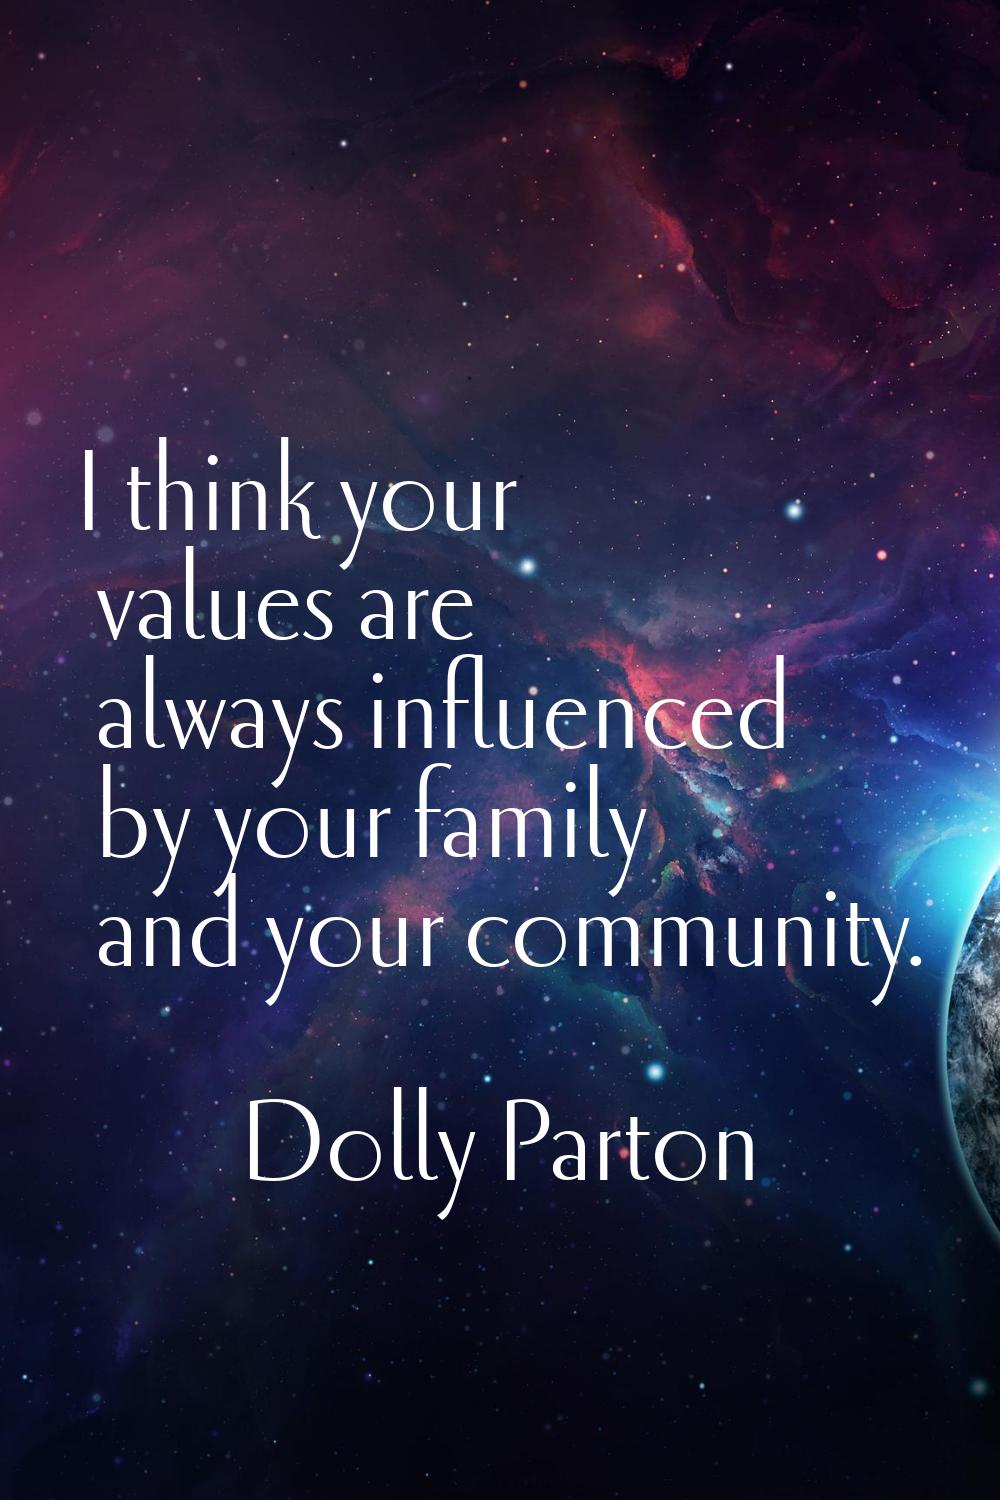 I think your values are always influenced by your family and your community.